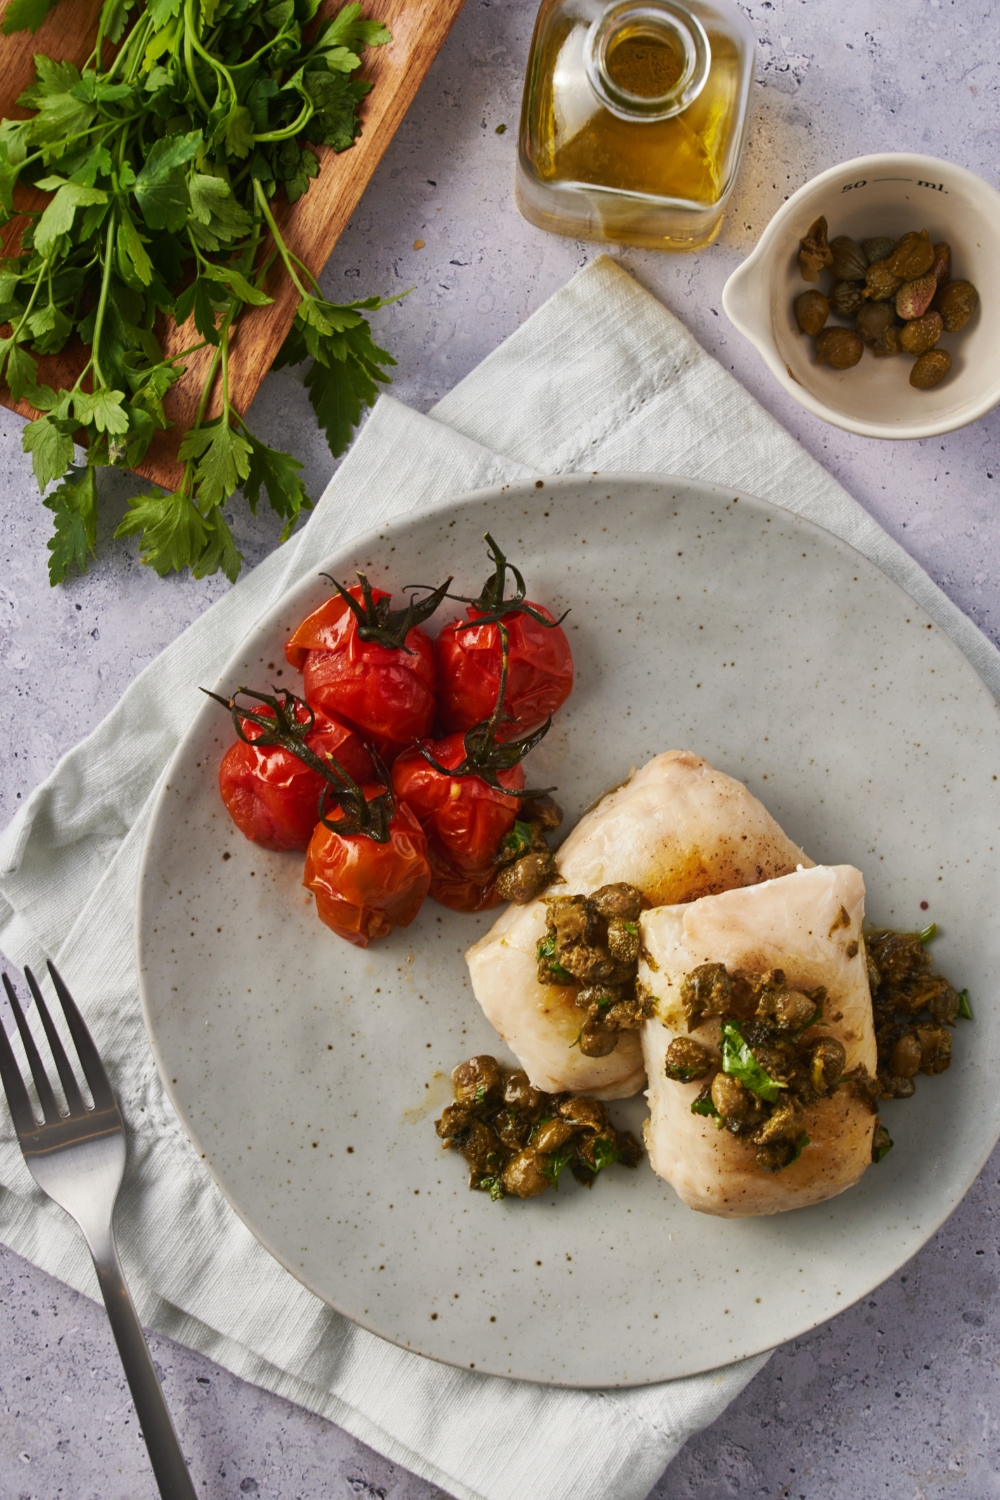 Overhead view of two cooked halibut fillets, both covered in a caper and herb mixture. Next to the fish are five roasted cherry tomatoes.